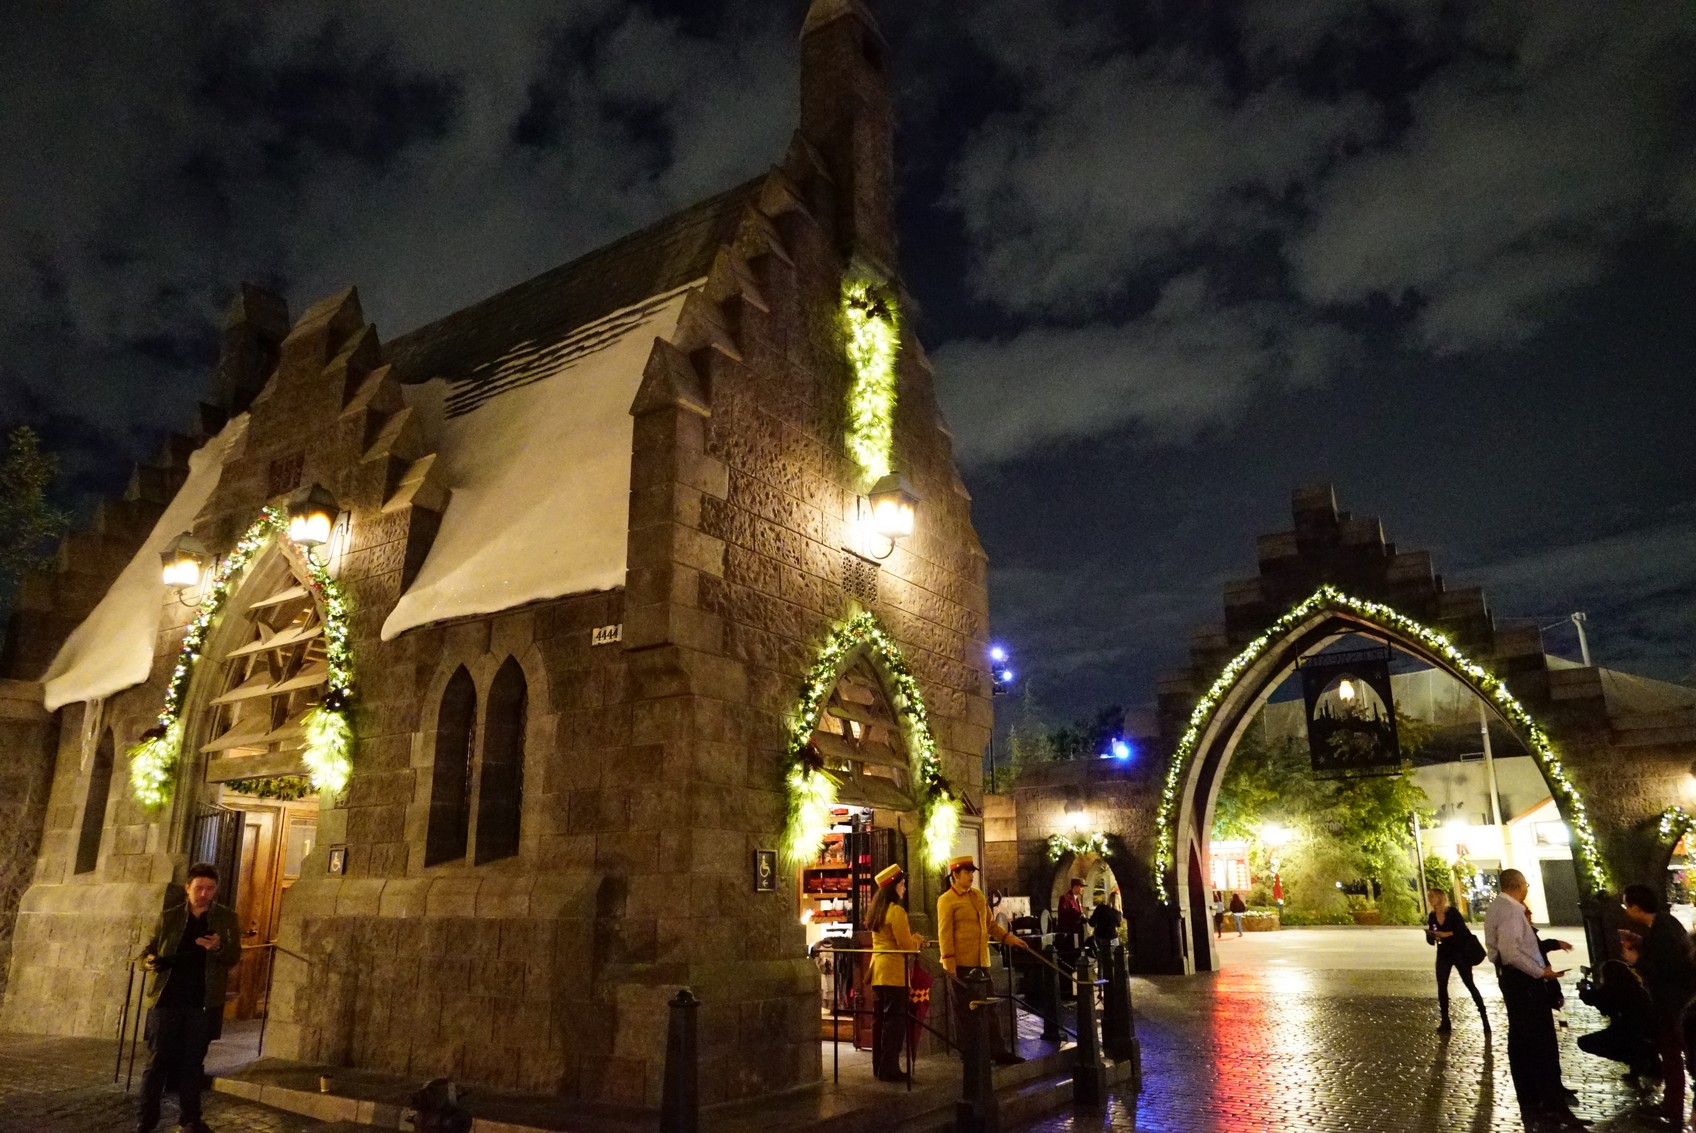 Previewing Christmas at the Wizarding World at Universal Studios